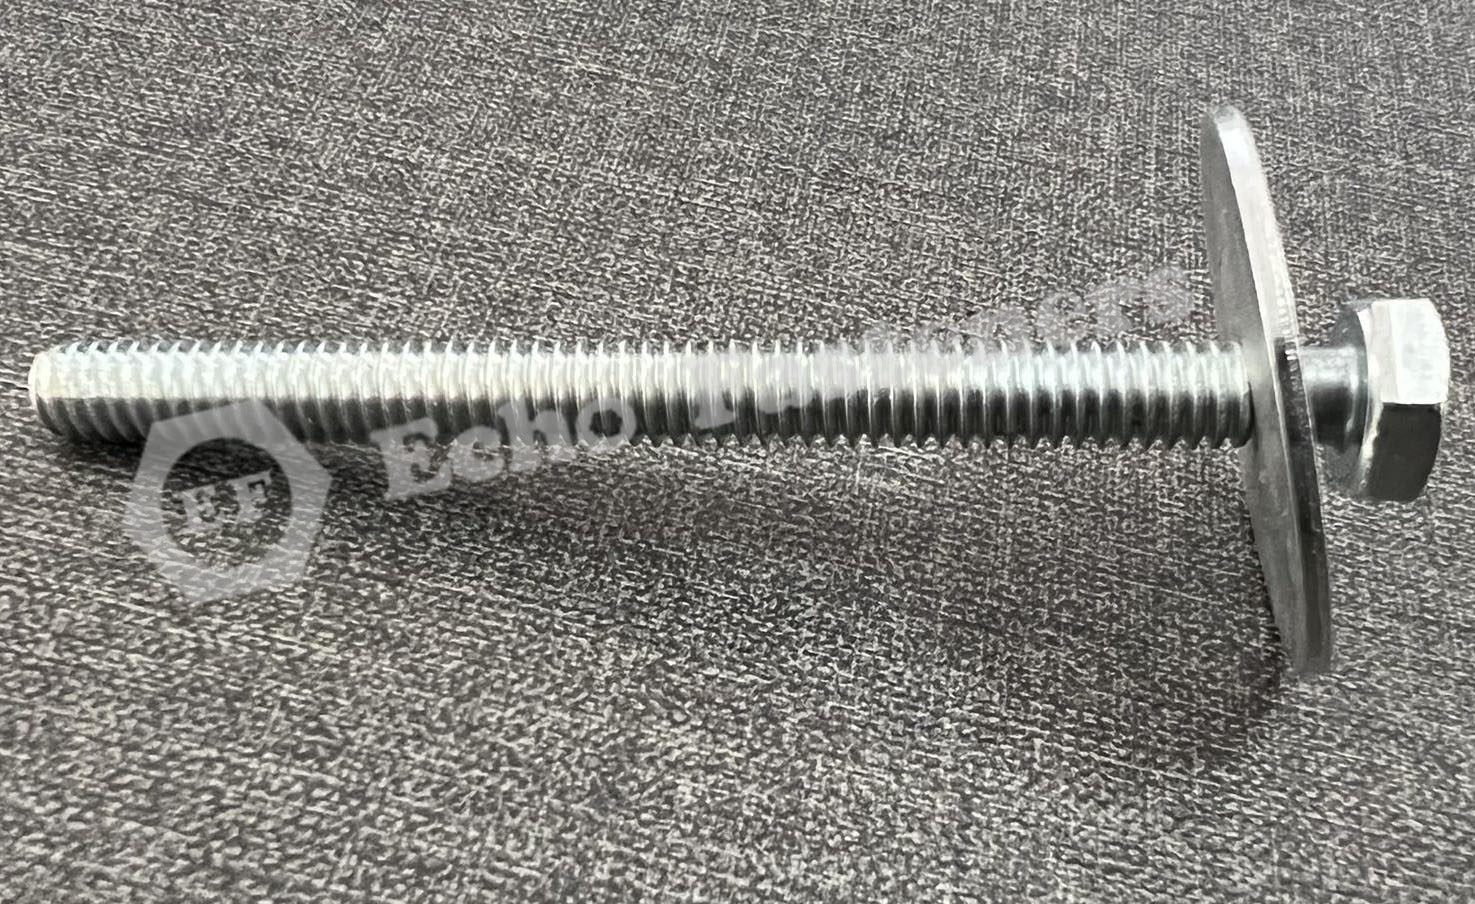 M6X60 HEX BOLT WITH FLAT WASHER